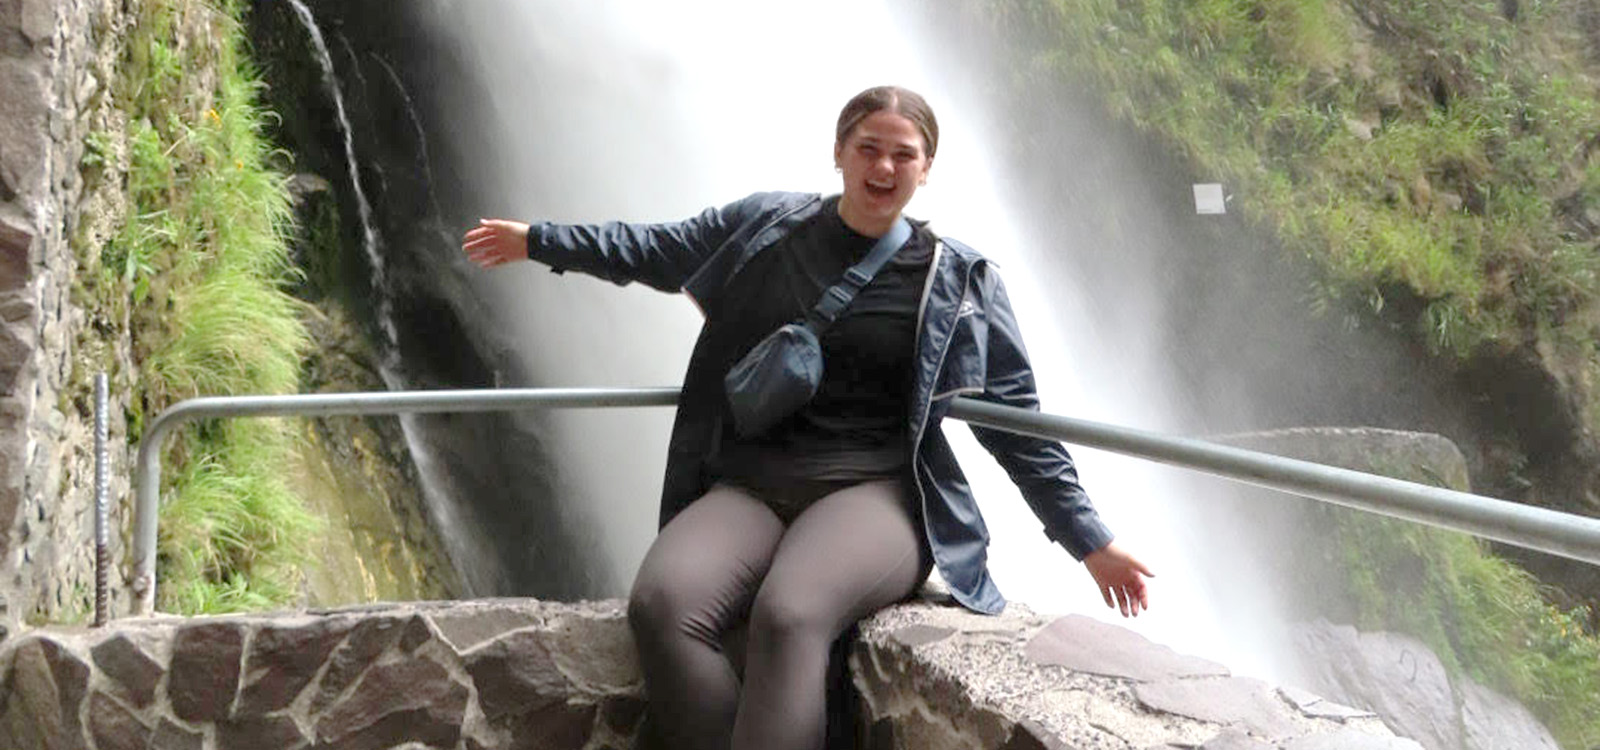 McKenna sits on a ledge in front of a waterfall in Ecuador